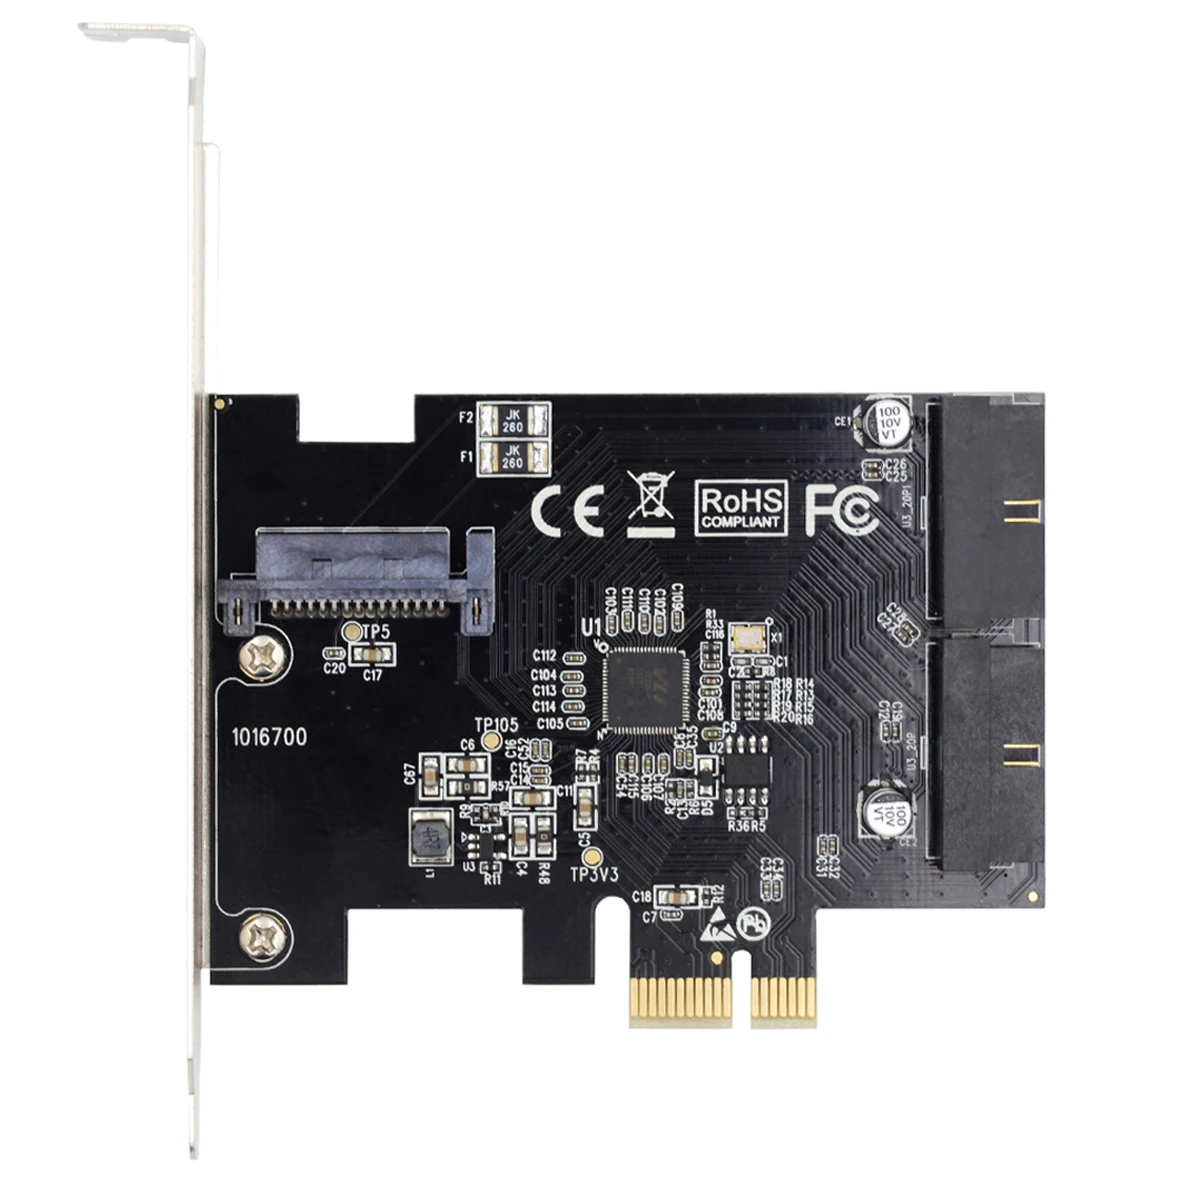 

Cablecc VL805 Front Panel Header USB 3.0 19Pin 20Pin to PCI-E 1X Express Card Adapter for Desktop Computer Motherboard 5Gbps